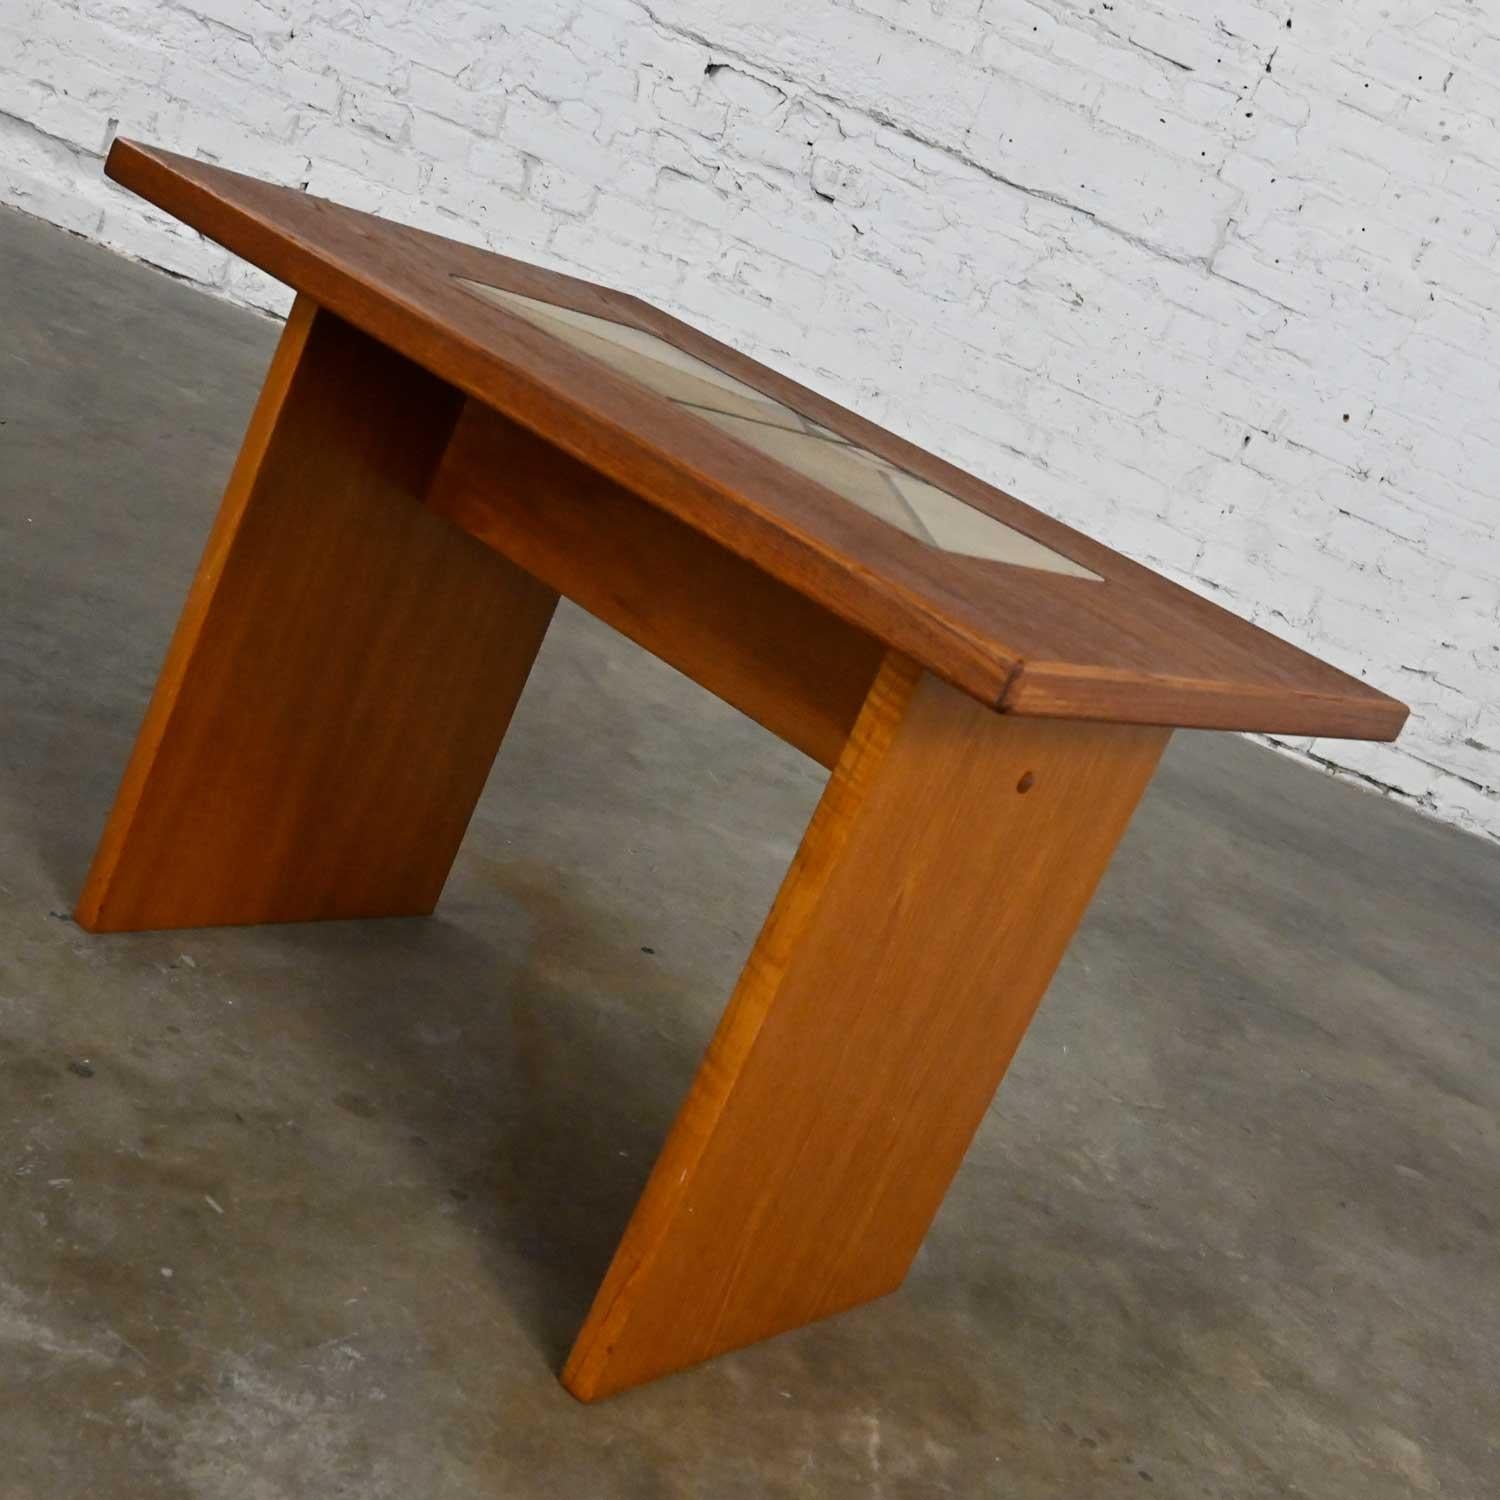 Gorgeous Scandinavian Modern teak rectangular side table or end table with unique tile insert by Gangso Mobler. Beautiful condition, keeping in mind that this is vintage and not new so will have signs of use and wear. The top has been stained and